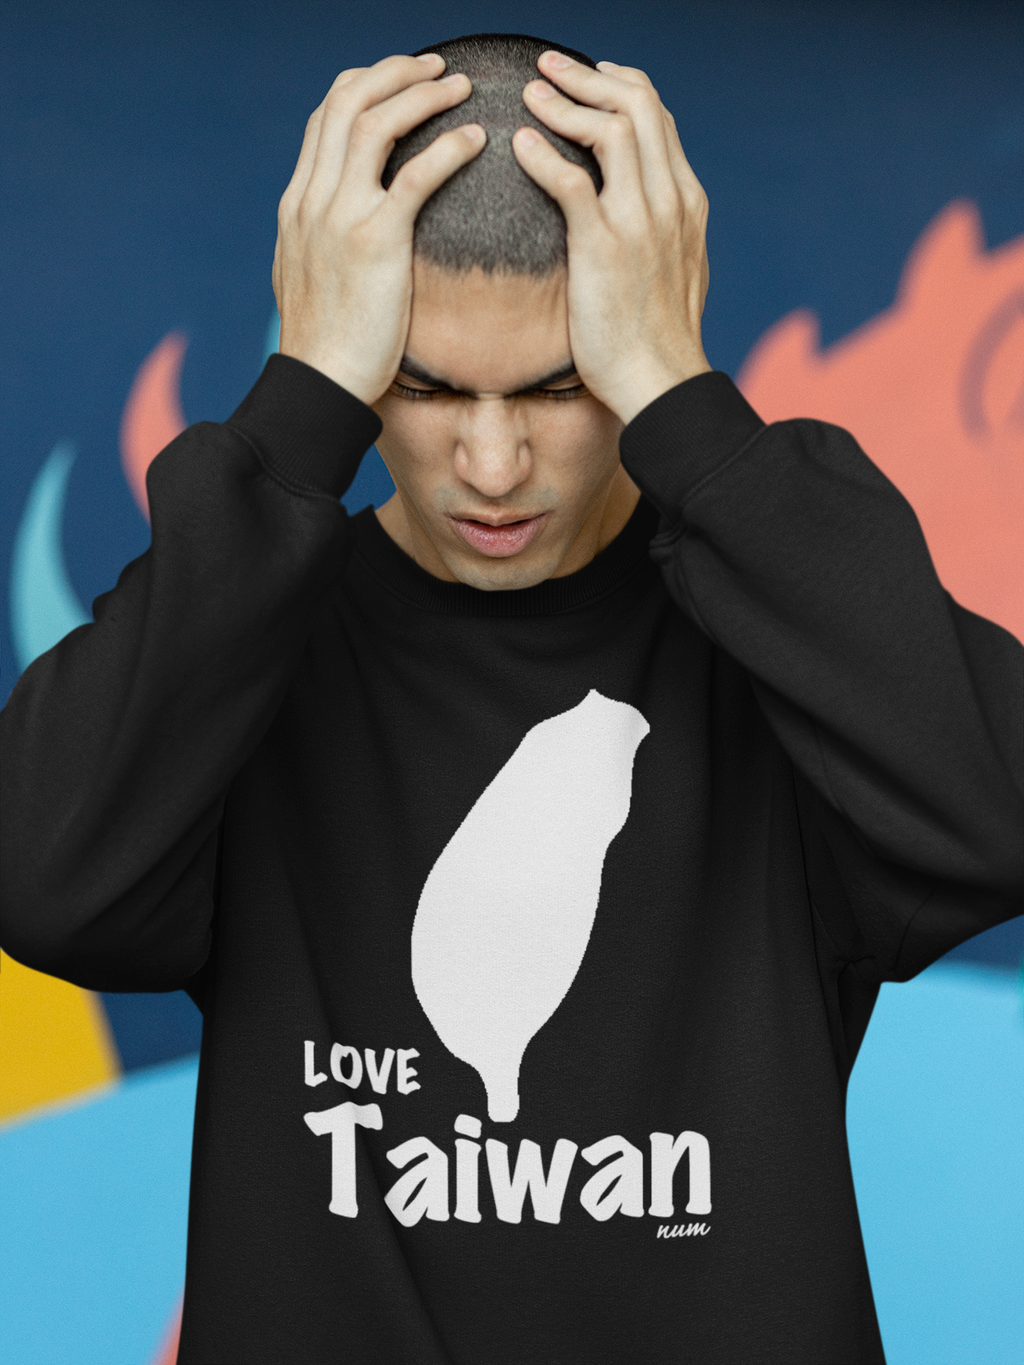 sweatshirt-mockup-featuring-a-man-with-a-stressed-look-m22408.png